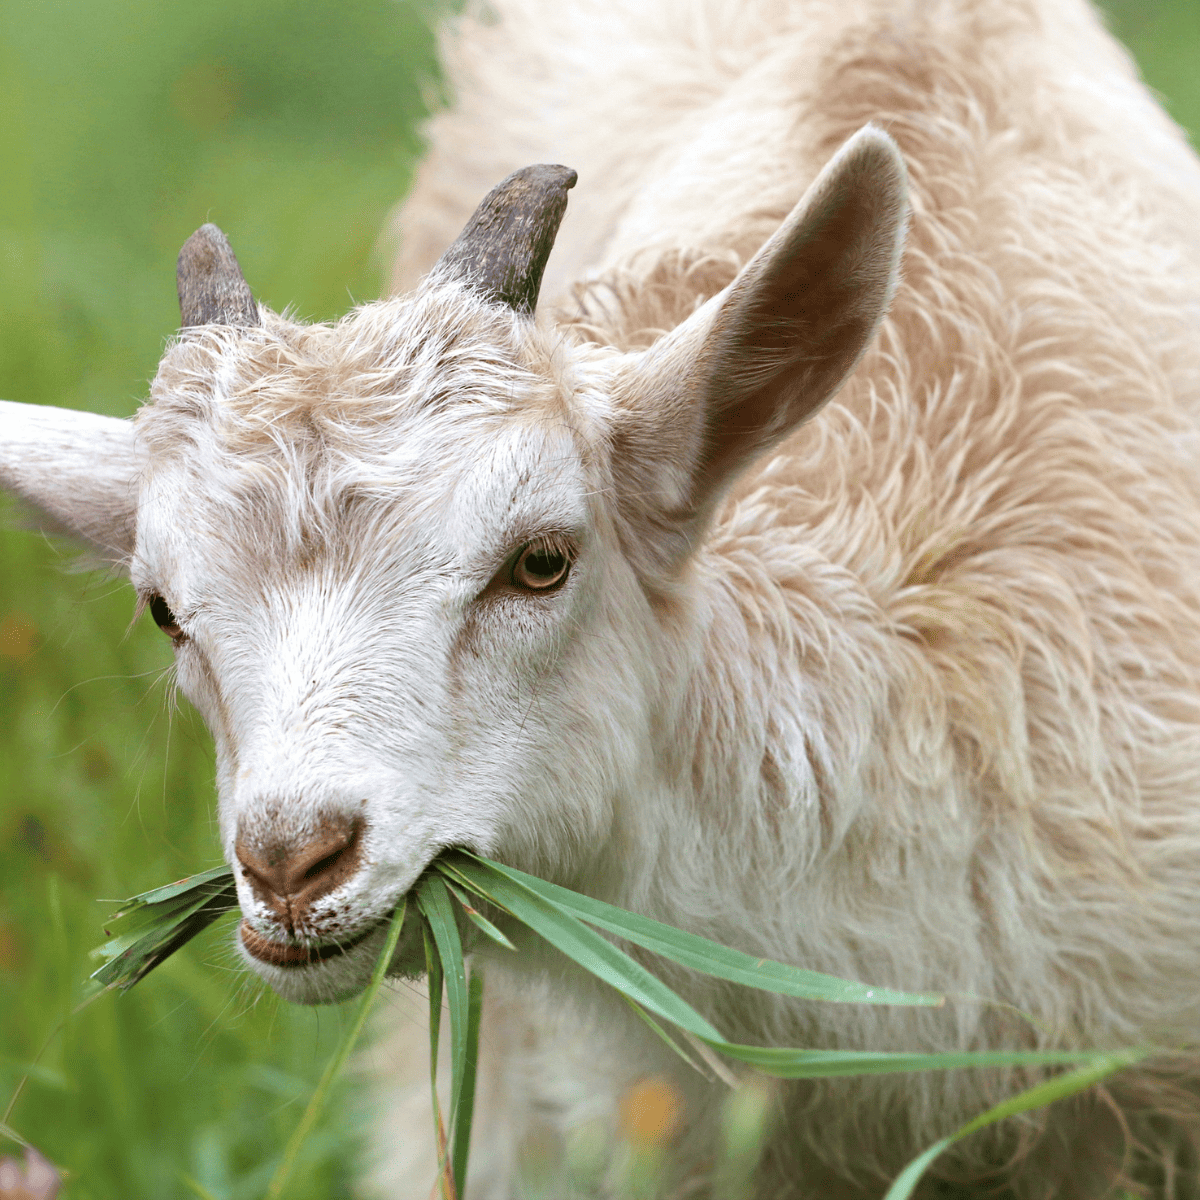 goat eating grass in a pasture.